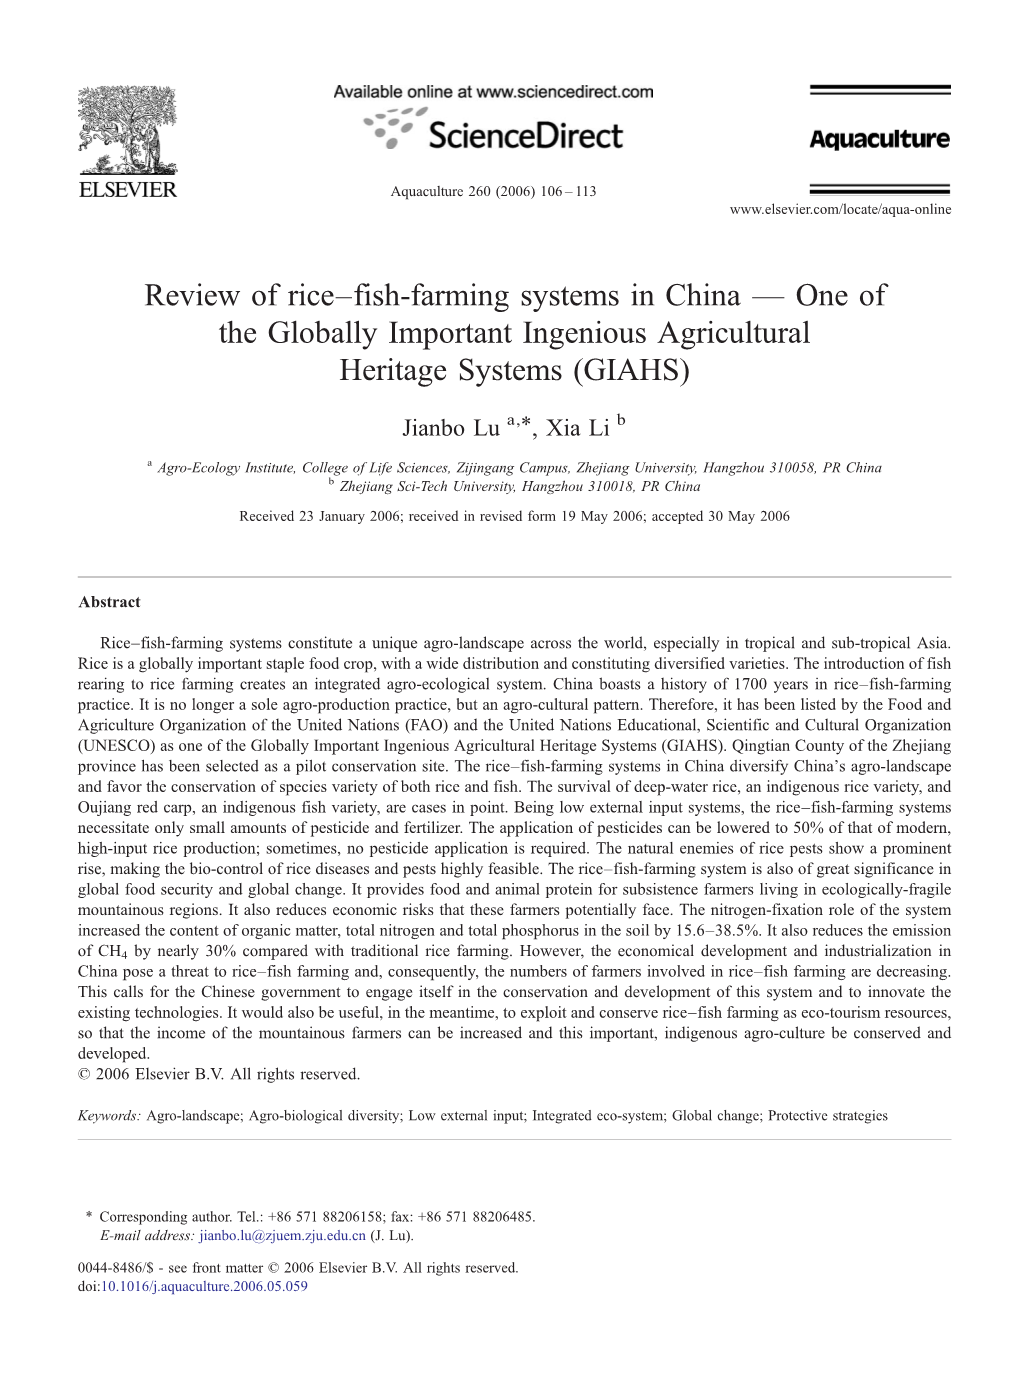 Review of Rice–Fish-Farming Systems in China — One of the Globally Important Ingenious Agricultural Heritage Systems (GIAHS) ⁎ Jianbo Lu A, , Xia Li B